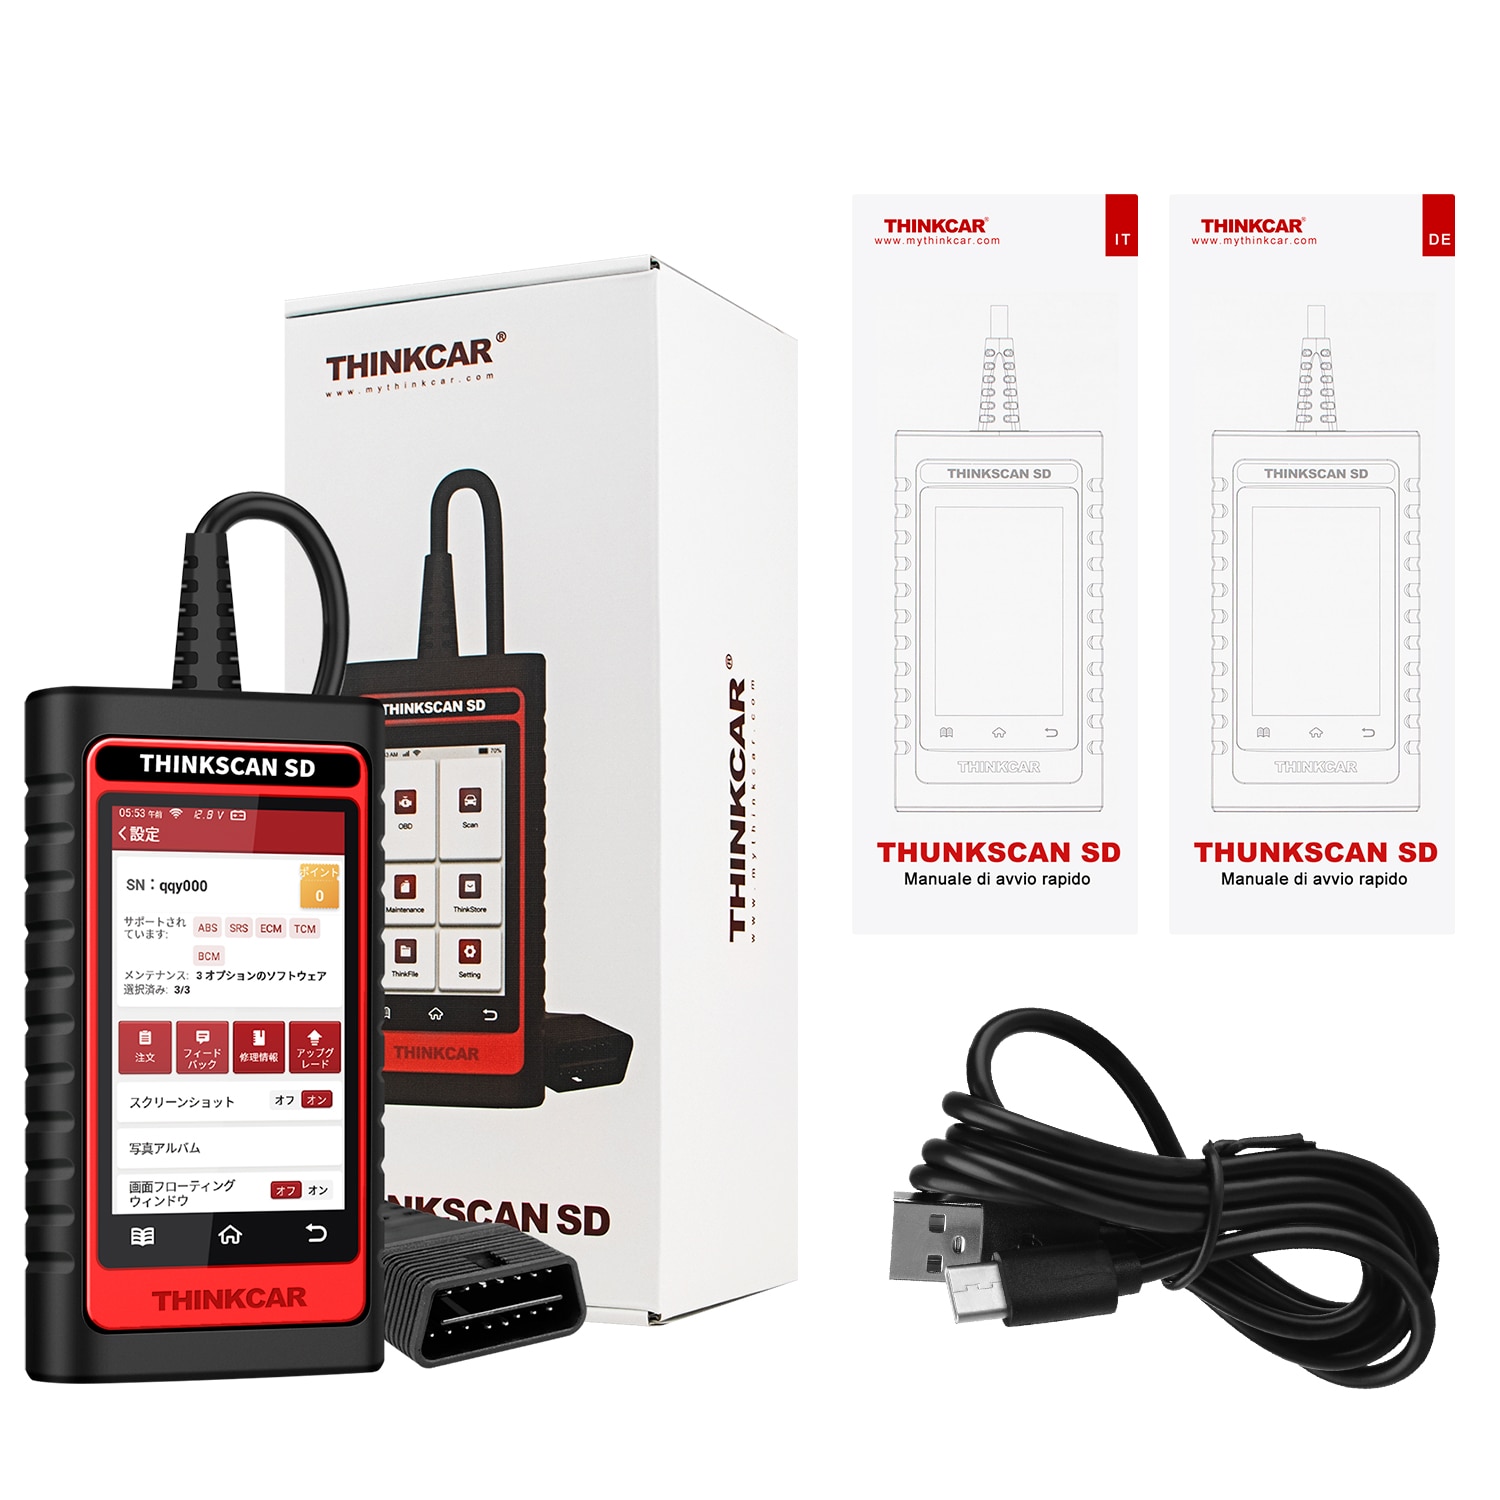 THINKCAR-Thinkscan-SD2-OBD2-Scanner-Resets-Full-System-Car-Diagnostic-Tool-Code-Reader-Professional-Scanner-Tool-1005003117506270